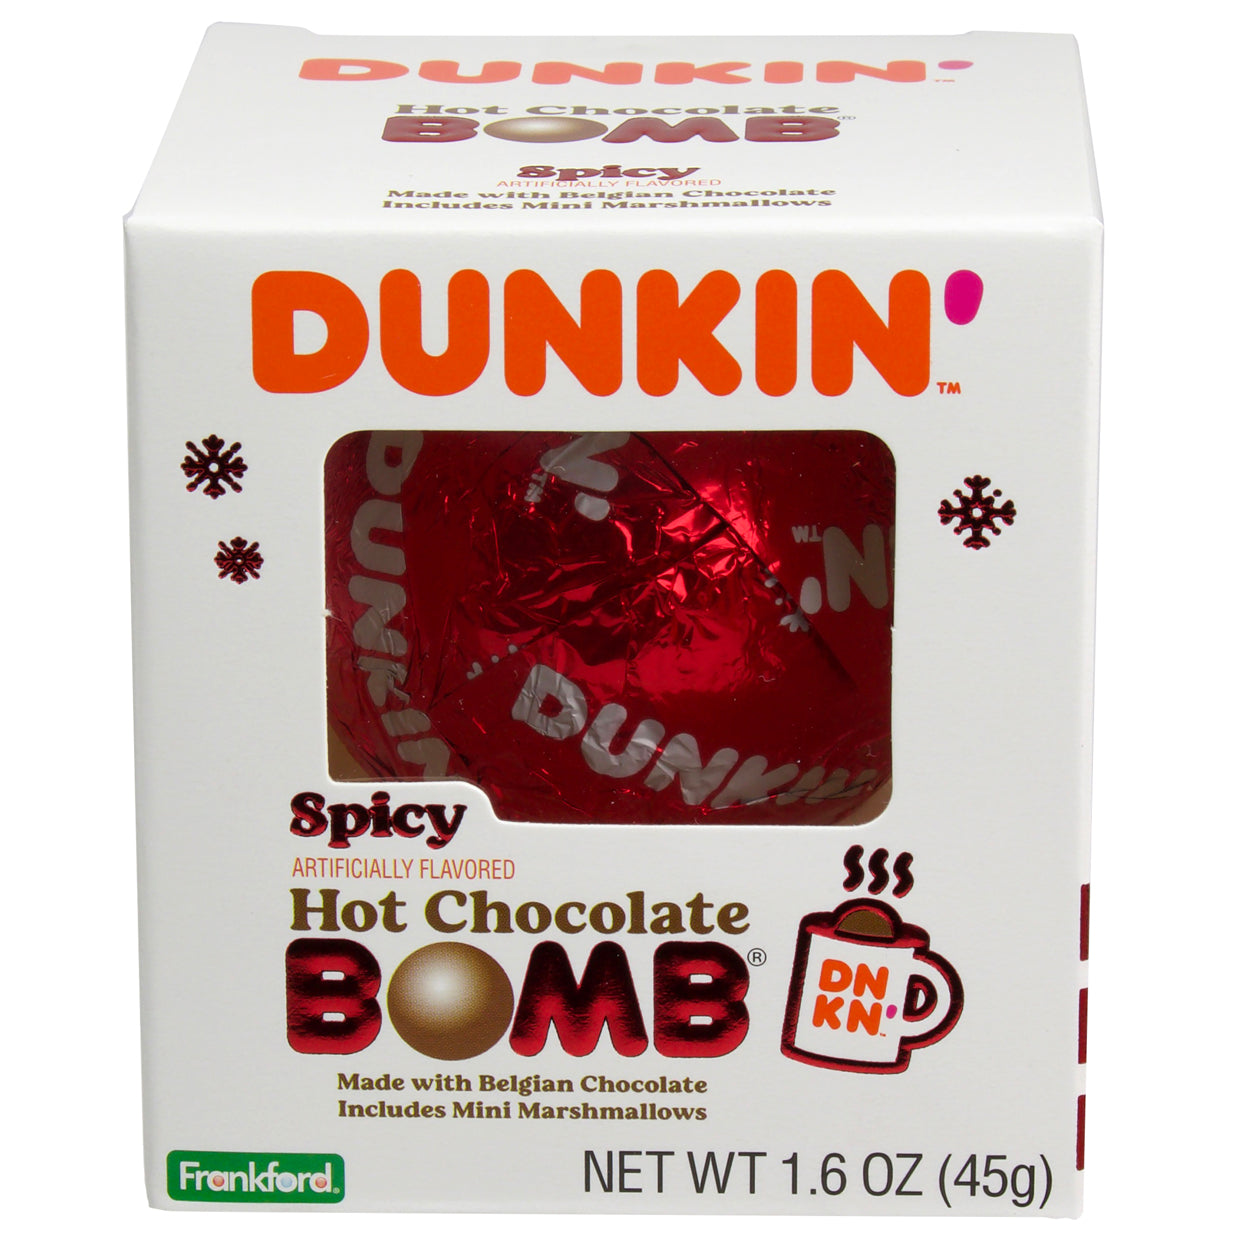 White Christmas themed box with 1 hot chocolate bomb wrapped in red foil with Dunkin' logo